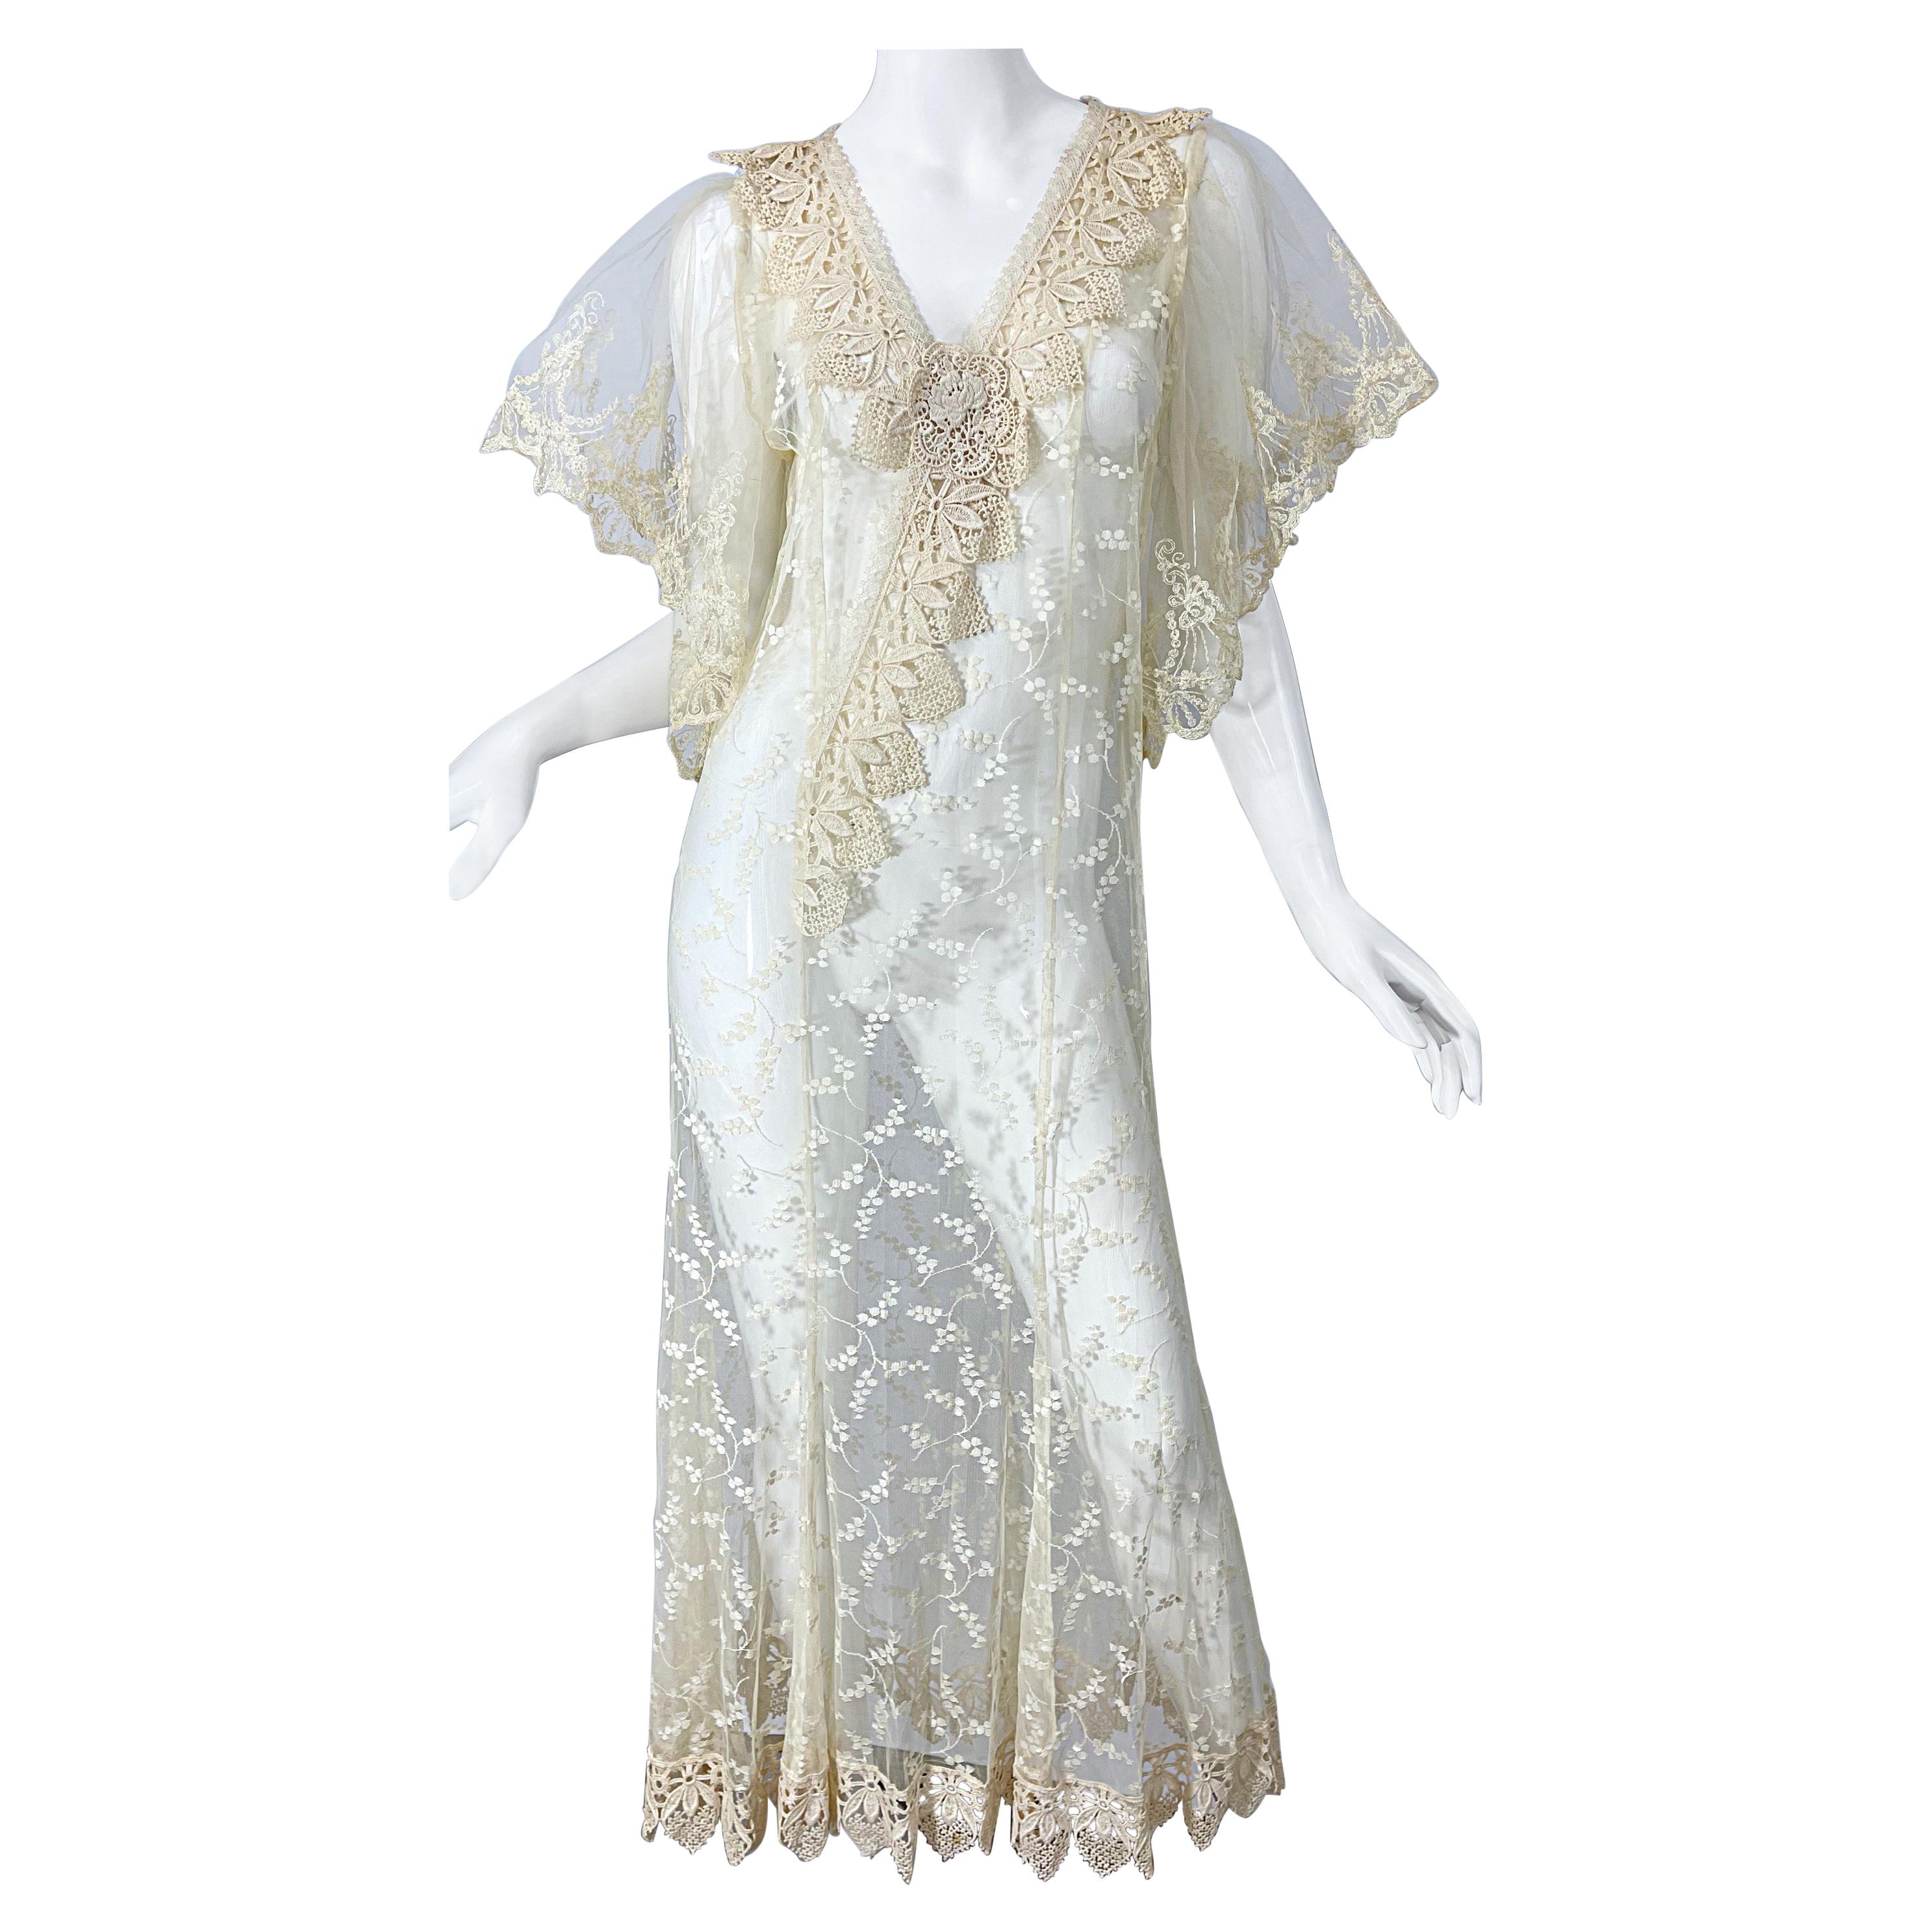 Lorrie Kabala 1980s Ivory Lace Sheer Size 8 Vintage 80s Caftan Maxi Dress For Sale